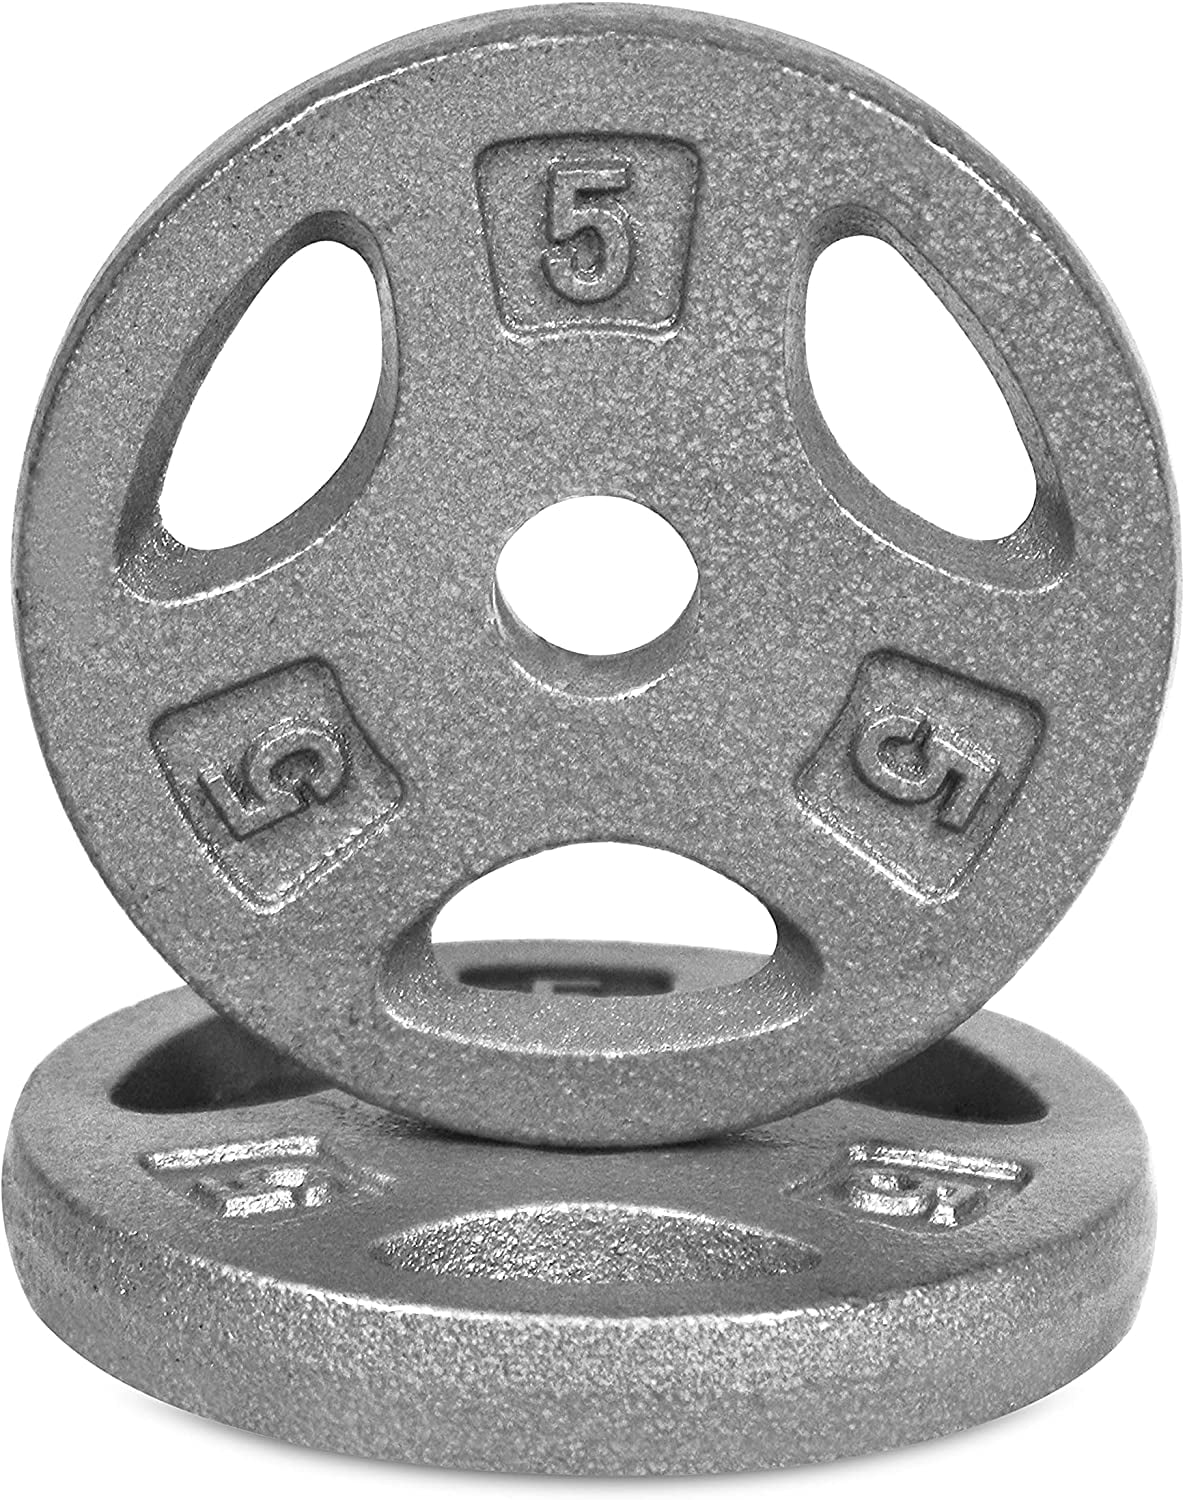 Muscle Toning Multiple Choices Available Cap Cast Iron 1 Standard Grip Plate for Strength Training Weight Loss & Crossfit Sold by Pair